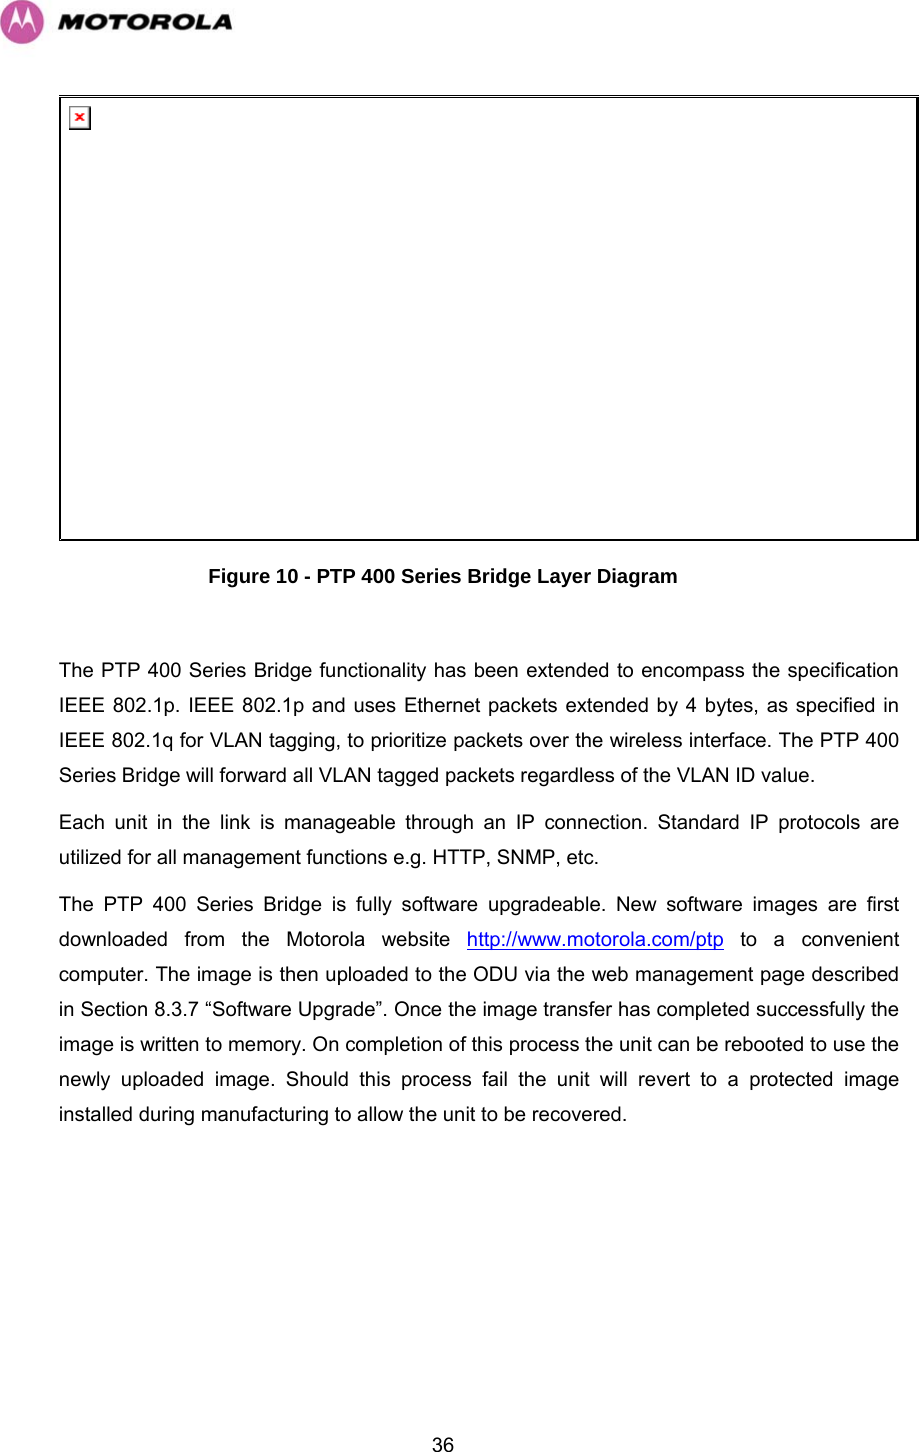   36 Figure 10 - PTP 400 Series Bridge Layer Diagram  The PTP 400 Series Bridge functionality has been extended to encompass the specification IEEE 802.1p. IEEE 802.1p and uses Ethernet packets extended by 4 bytes, as specified in IEEE 802.1q for VLAN tagging, to prioritize packets over the wireless interface. The PTP 400 Series Bridge will forward all VLAN tagged packets regardless of the VLAN ID value. Each unit in the link is manageable through an IP connection. Standard IP protocols are utilized for all management functions e.g. HTTP, SNMP, etc. The PTP 400 Series Bridge is fully software upgradeable. New software images are first downloaded from the Motorola website http://www.motorola.com/ptp to a convenient computer. The image is then uploaded to the ODU via the web management page described in Section 8.3.7 “Software Upgrade”. Once the image transfer has completed successfully the image is written to memory. On completion of this process the unit can be rebooted to use the newly uploaded image. Should this process fail the unit will revert to a protected image installed during manufacturing to allow the unit to be recovered.  